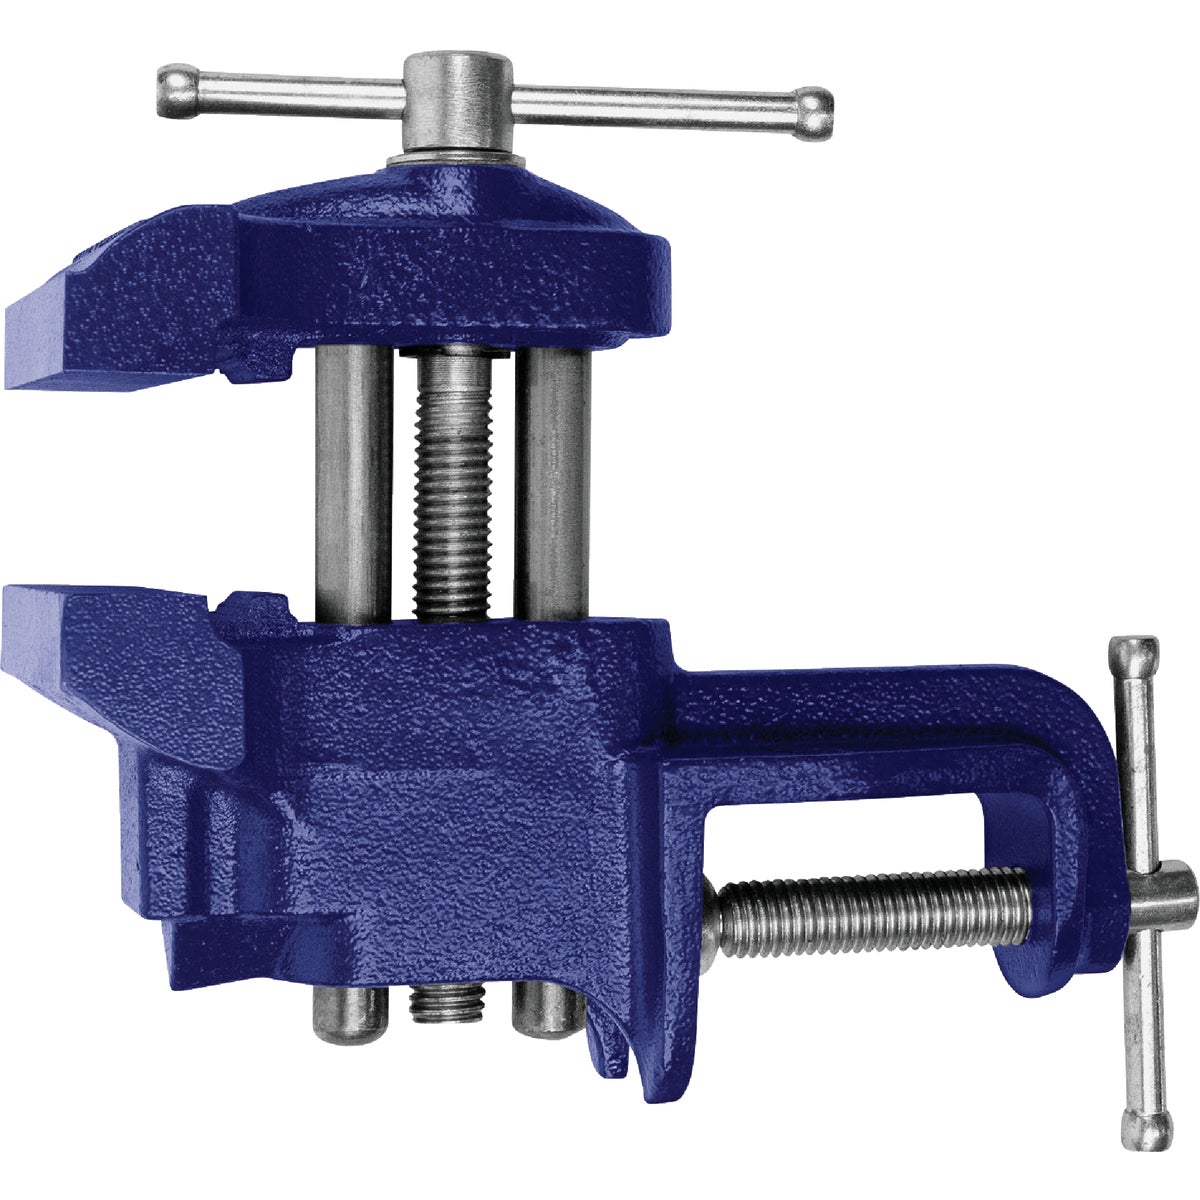 Irwin 3 In. Clamp-On Vise